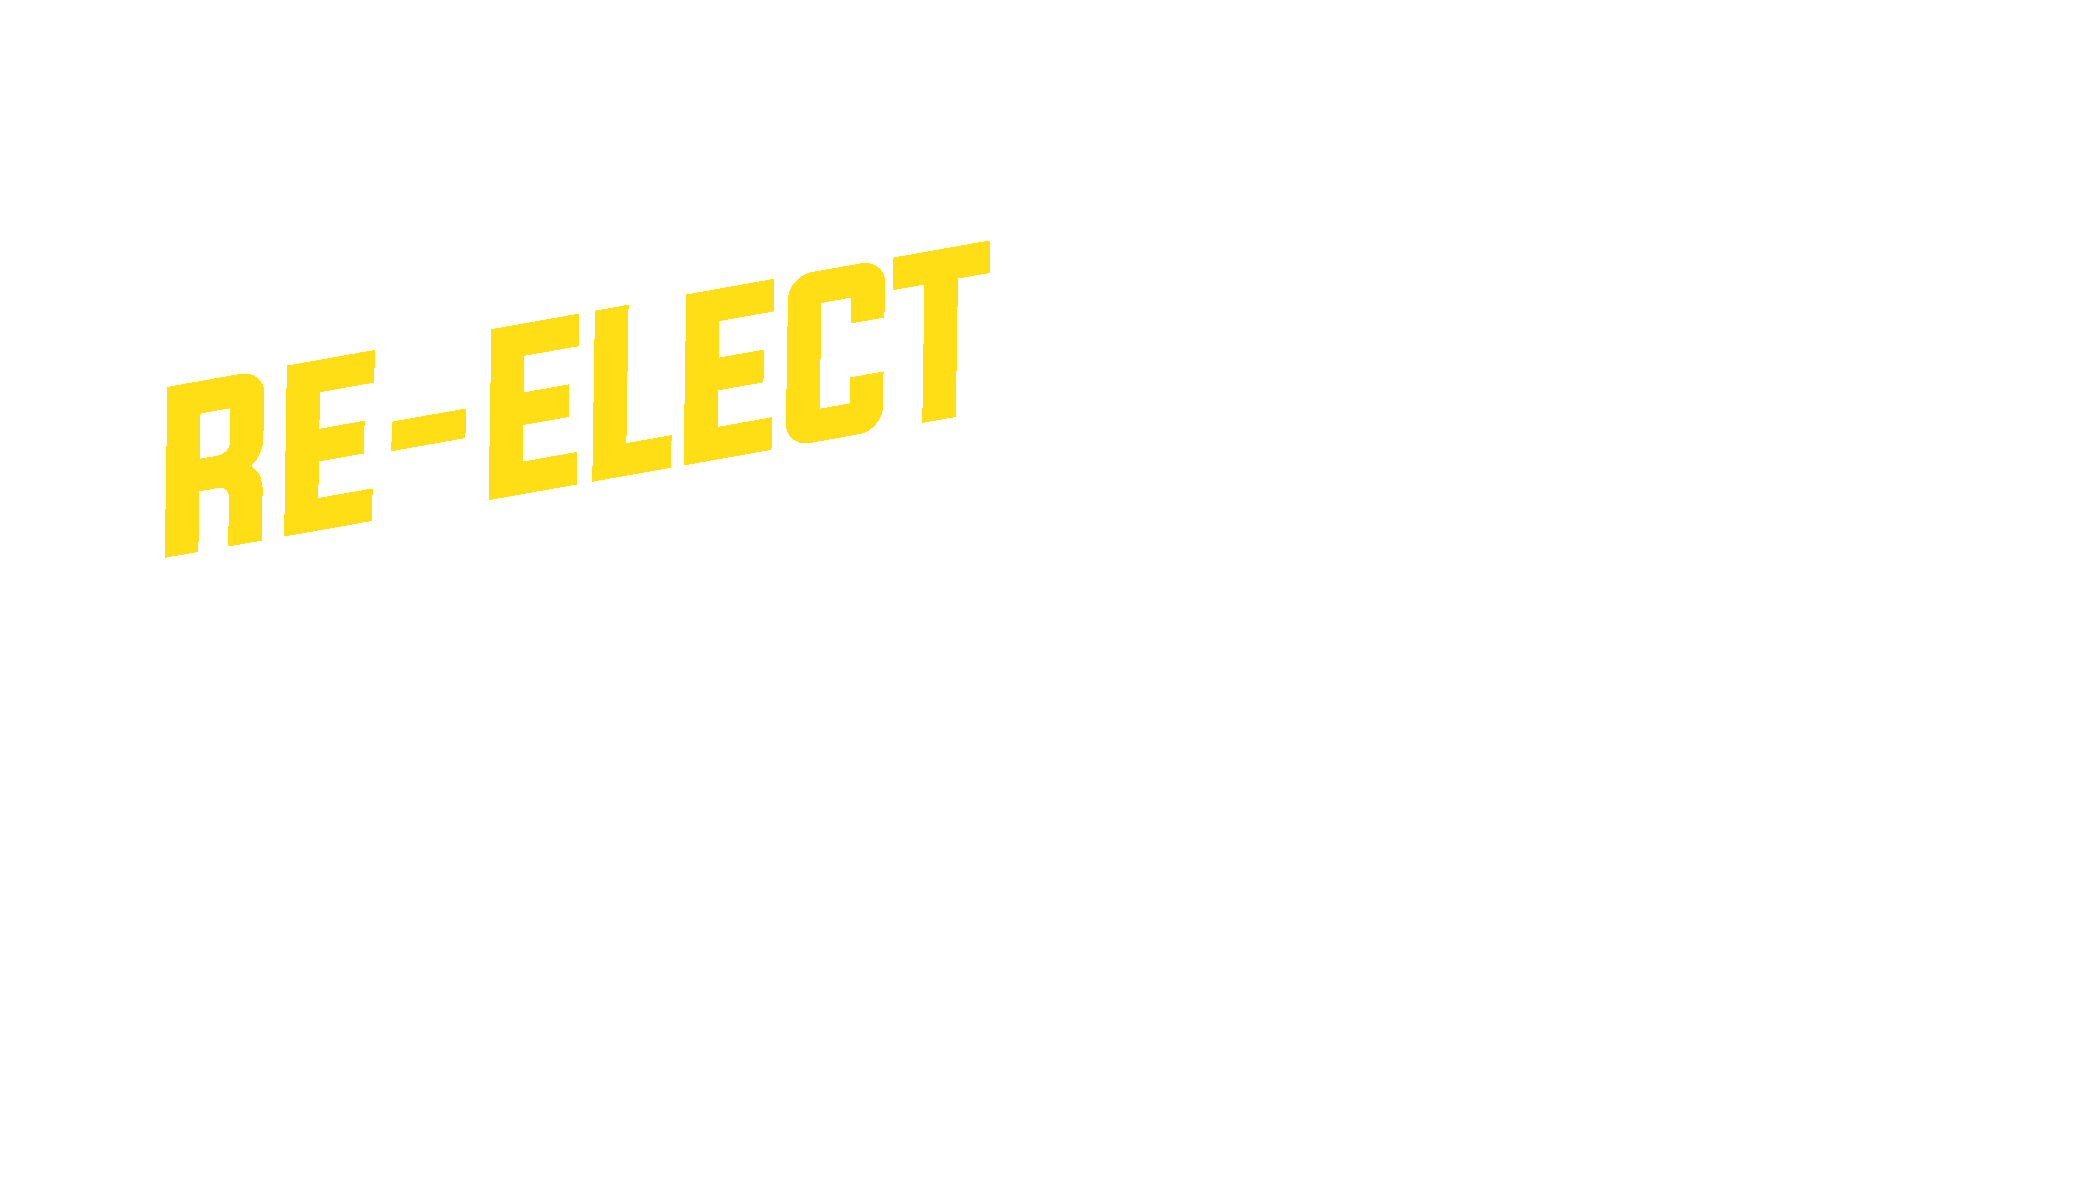 Nelsie Yang for Ward 6 City Council